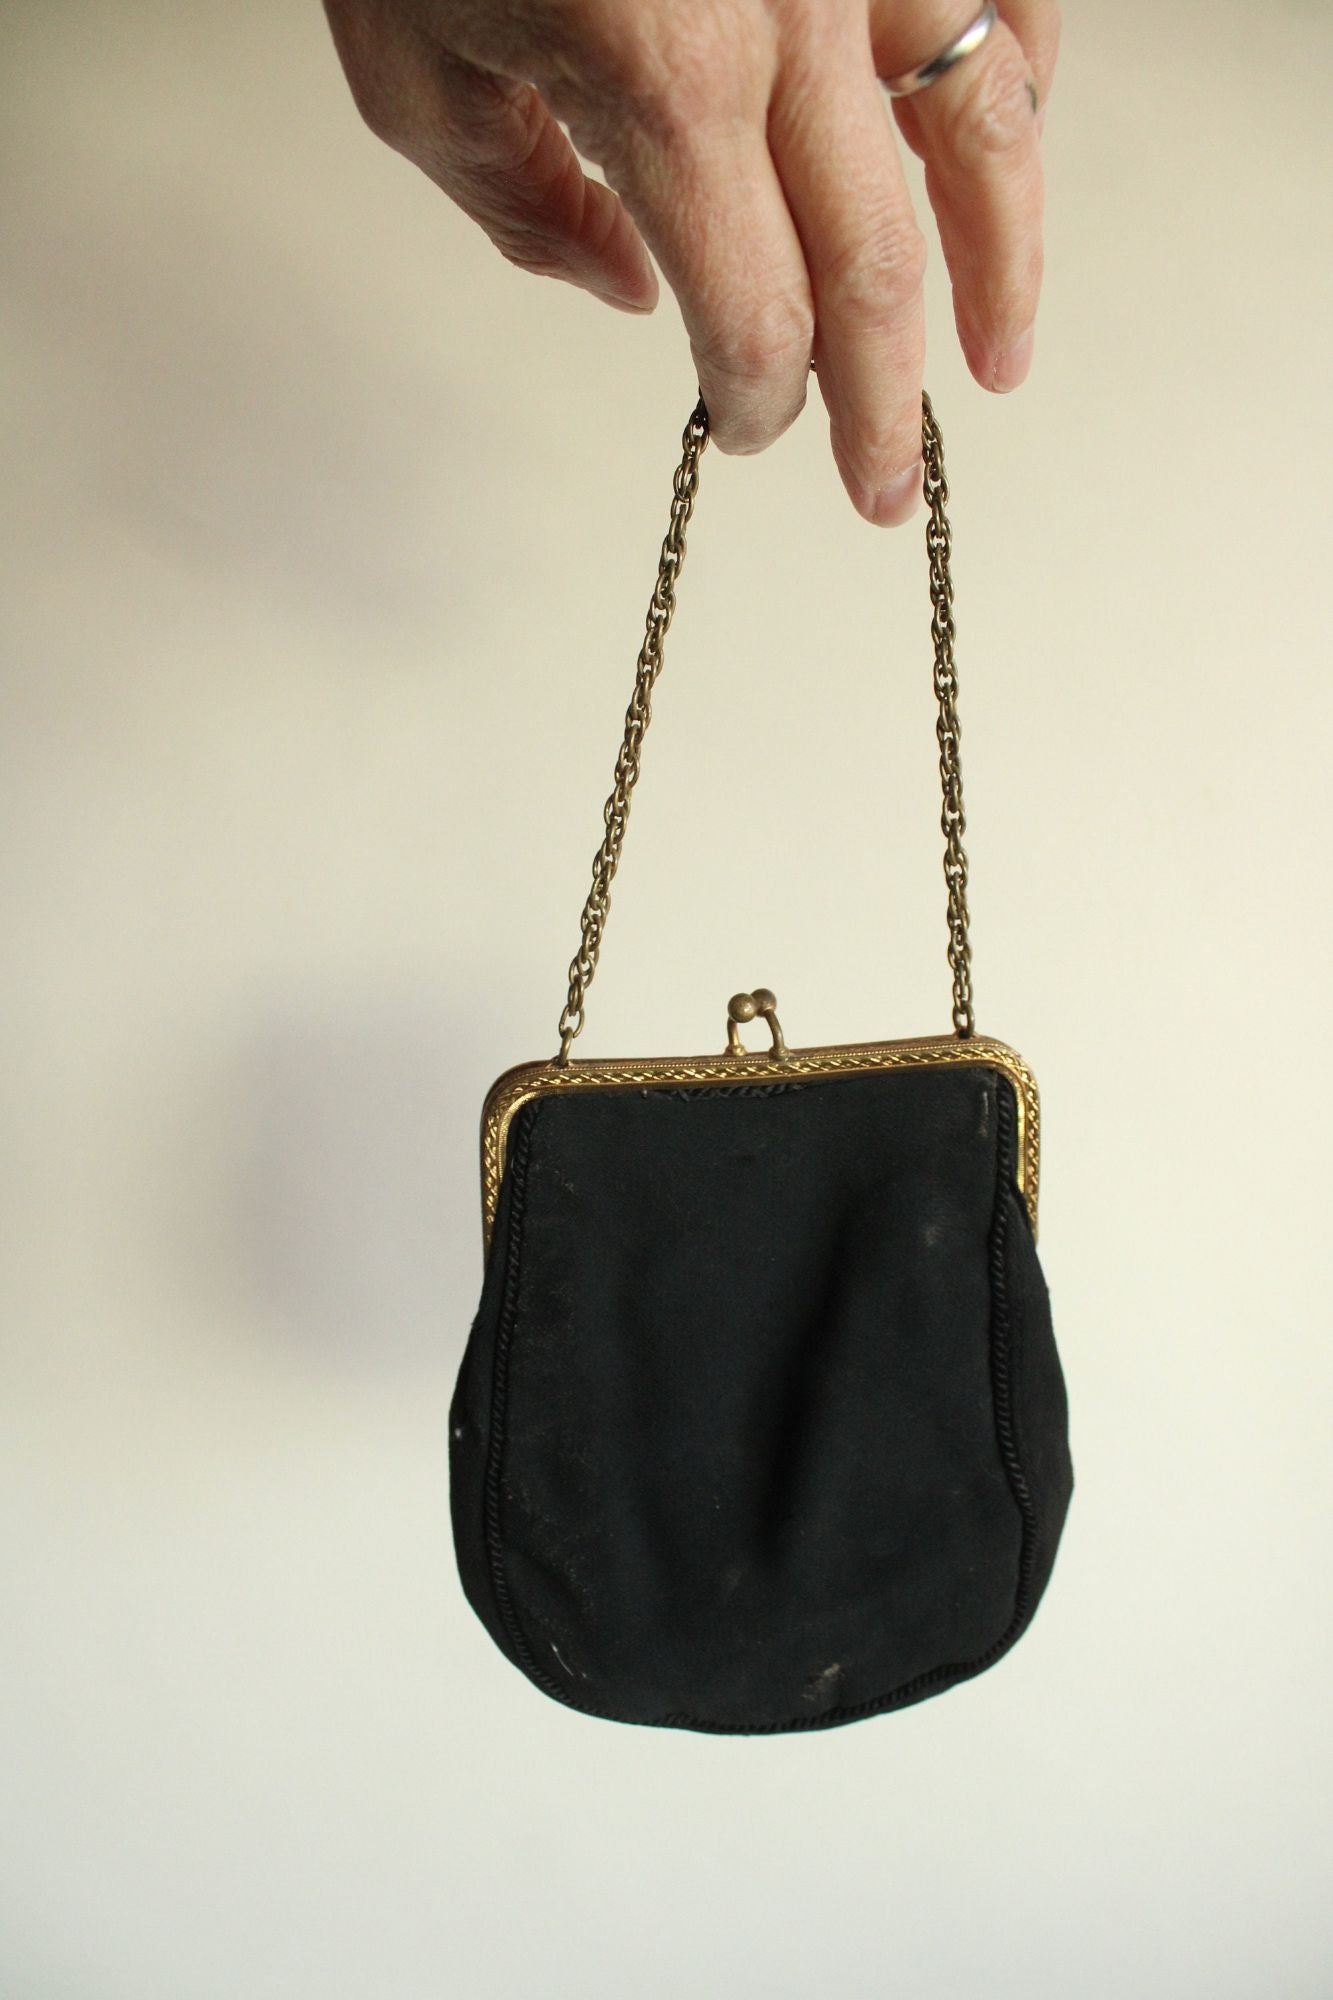 Vintage 1910s 1920s Black Embroidered Tapestry Purse